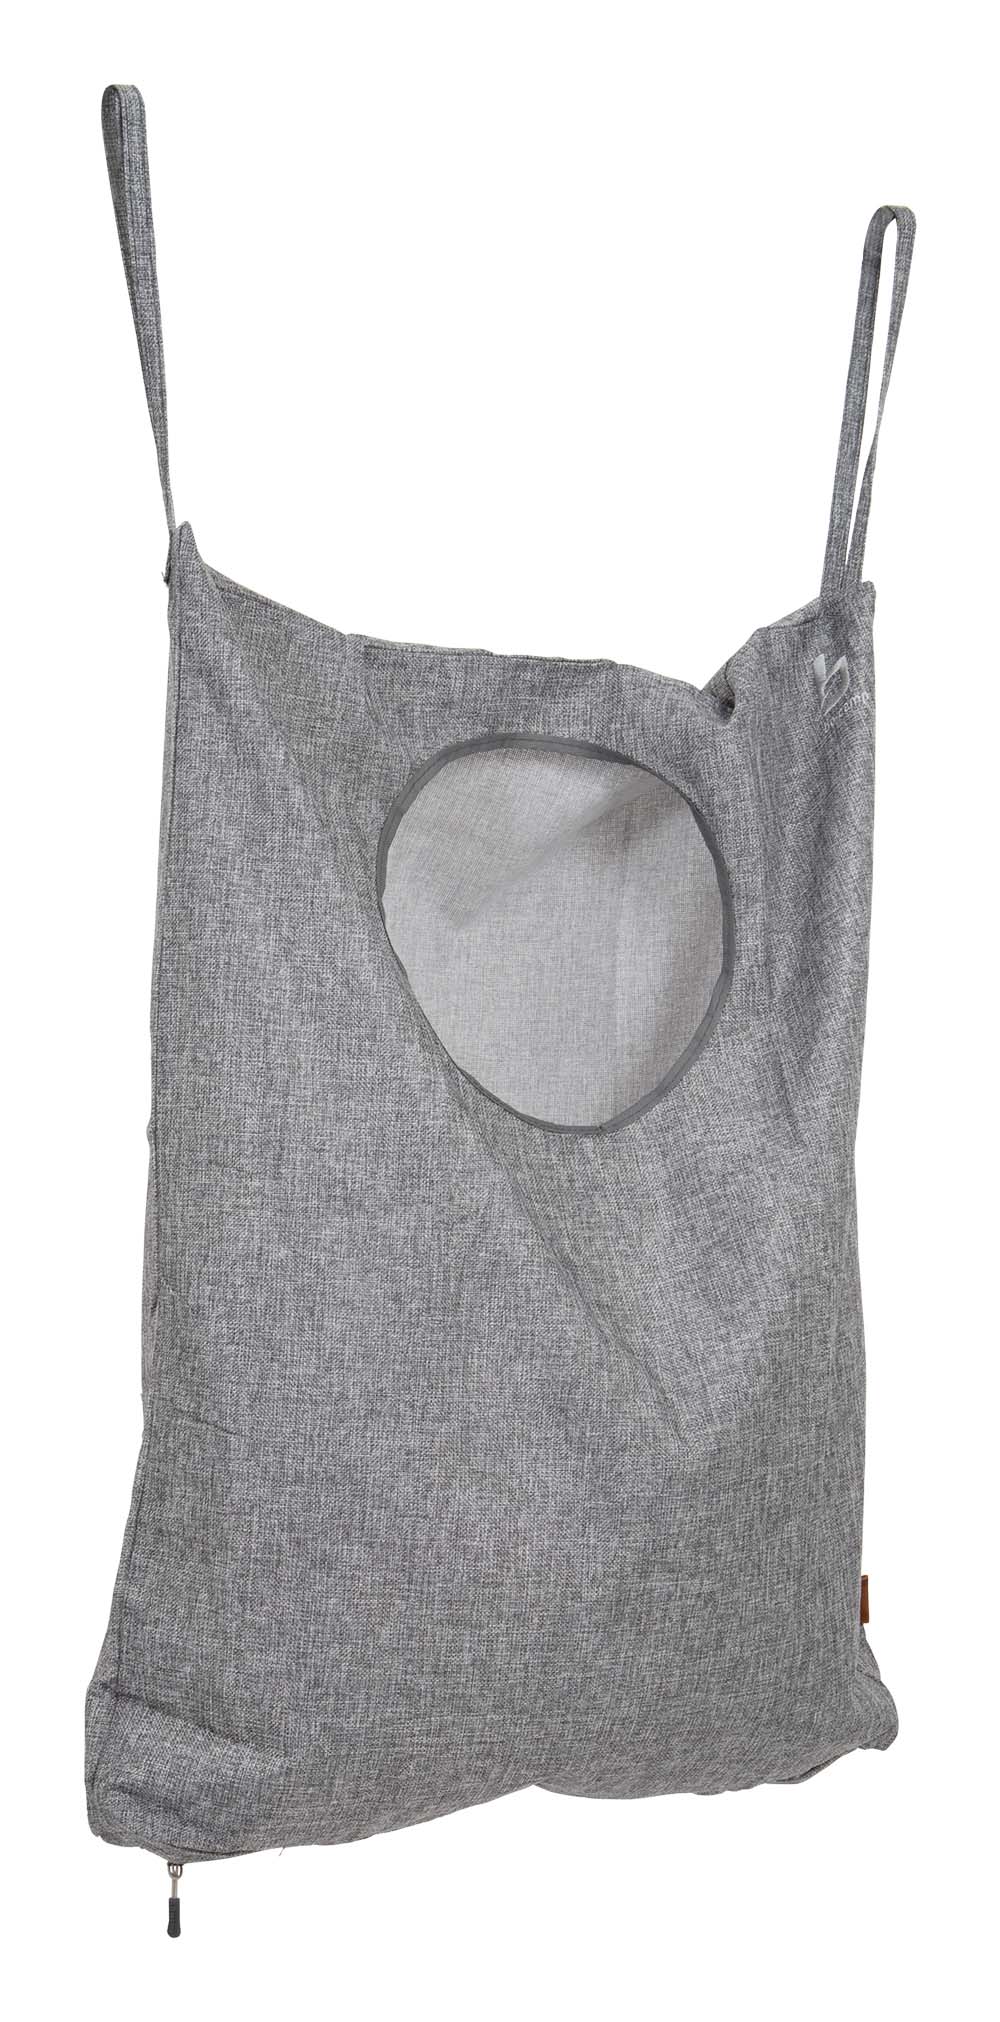 Bo-Camp - Urban Outdoor collection - Laundry bag - Lanes - Grey detail 3